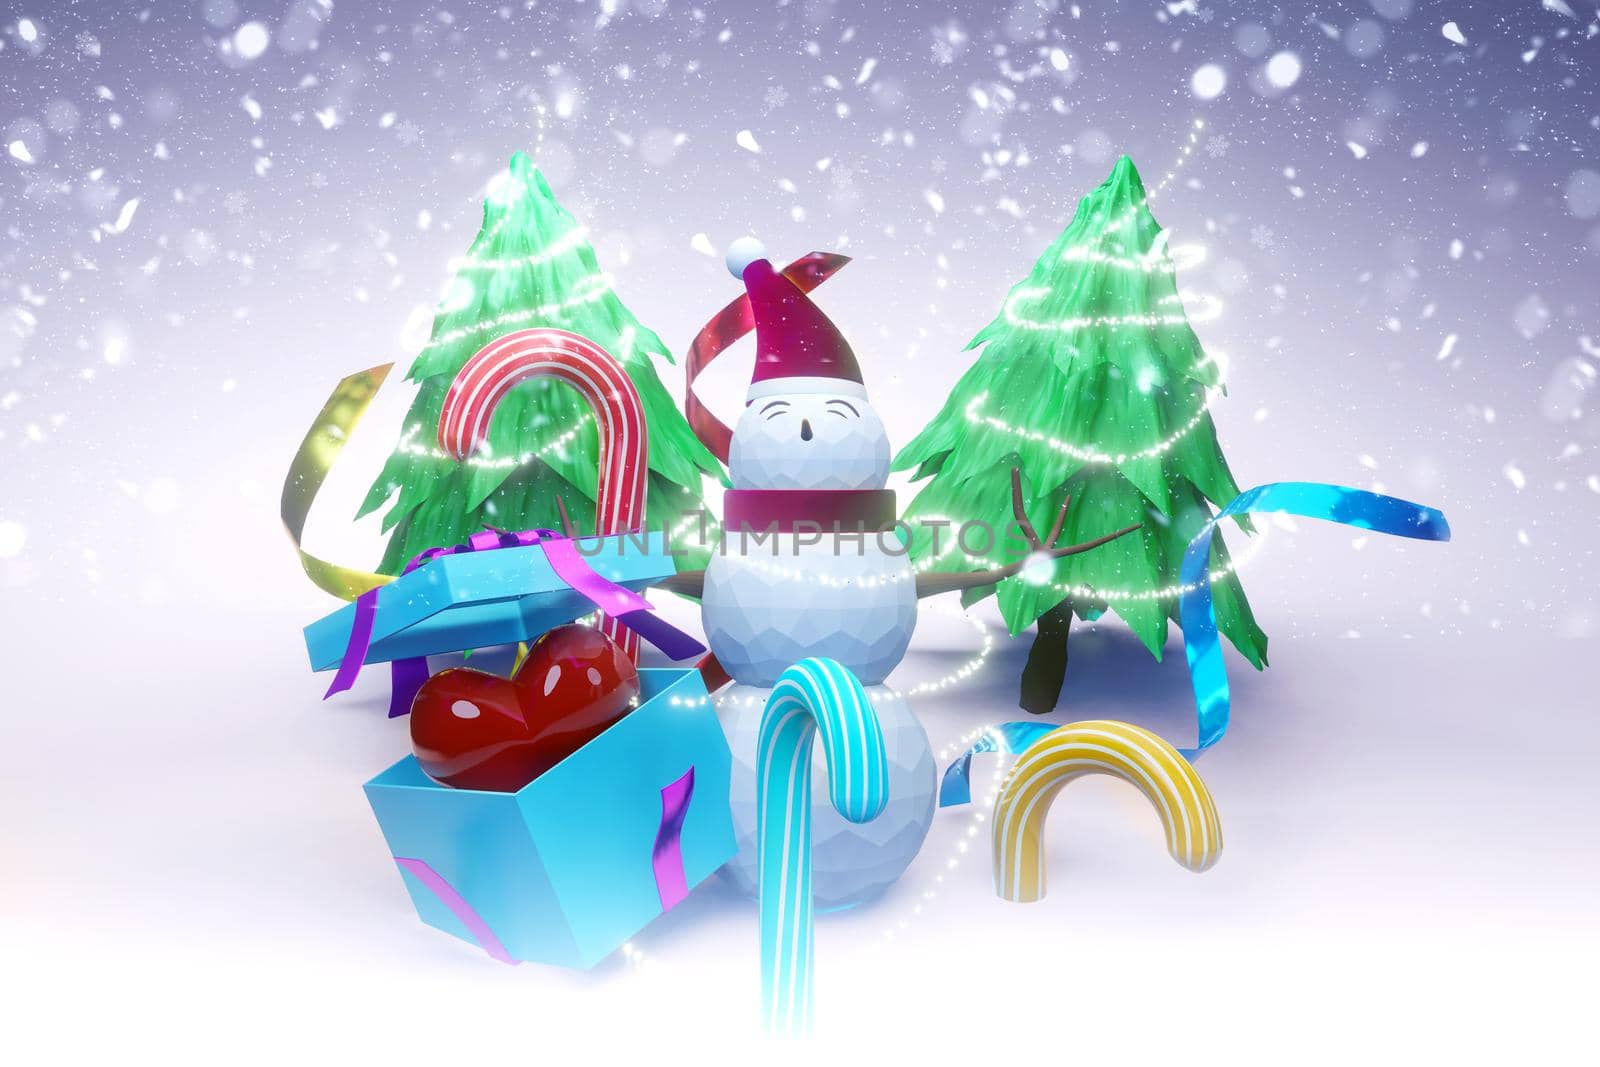 3d render image of christmas tree design for christmas holiday with snowman,candy,ribbon and gift box. by samunella